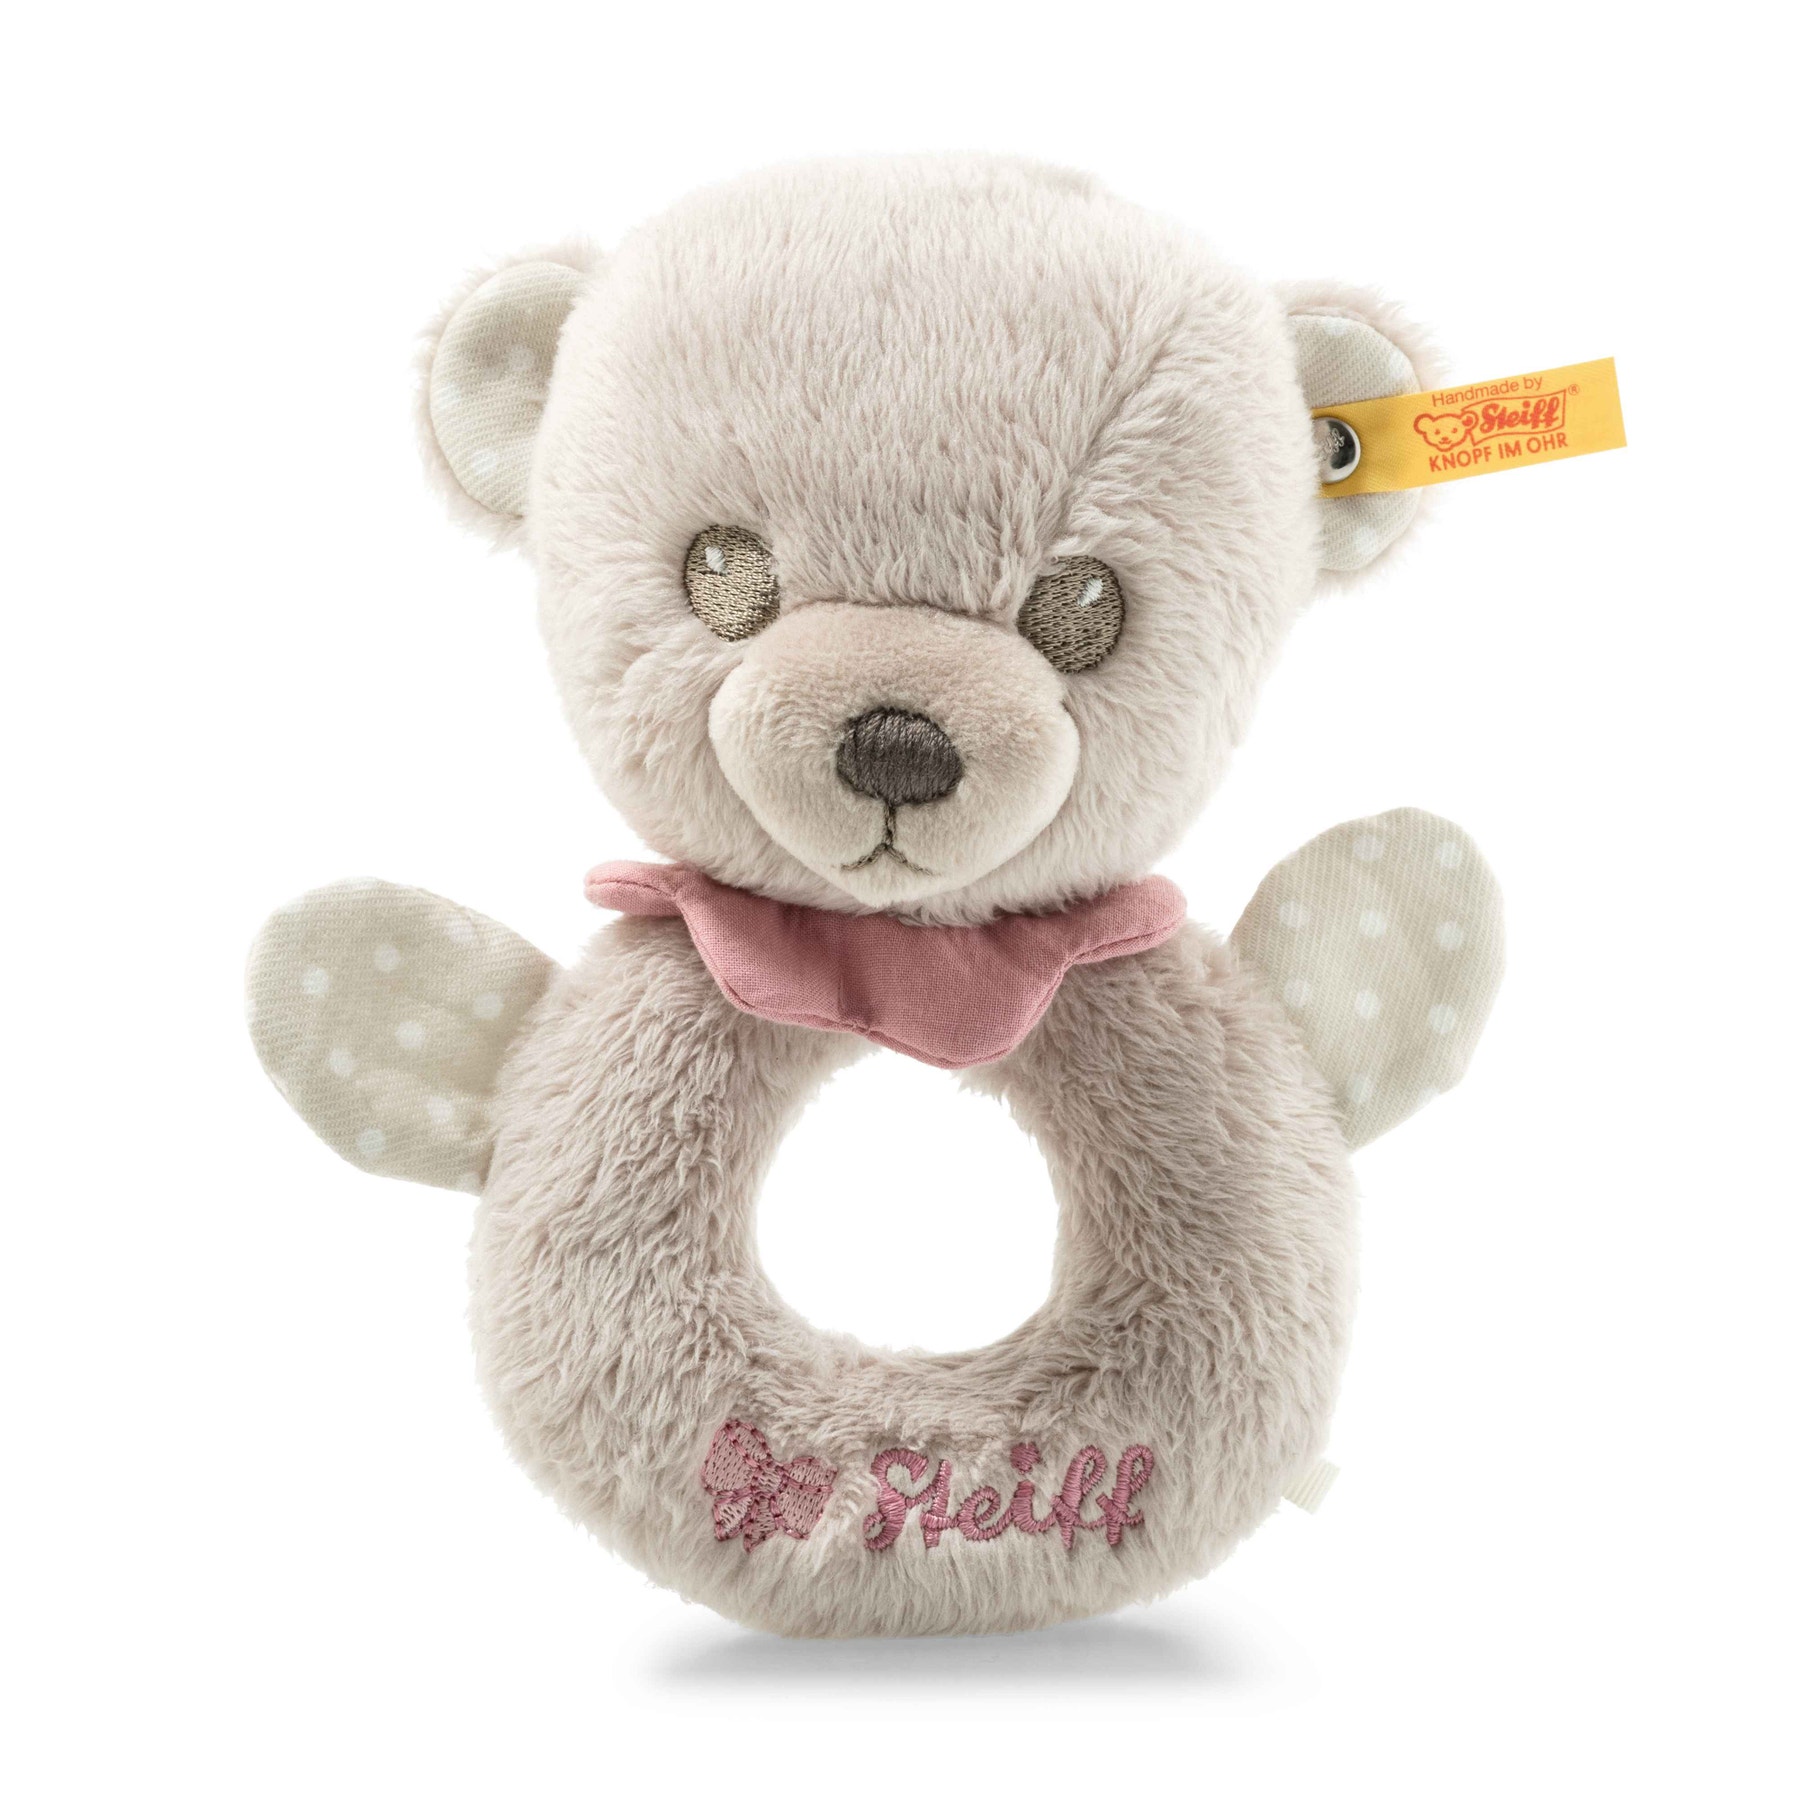 Hello Baby Lea Teddy bear grip toy with rattle in gift box